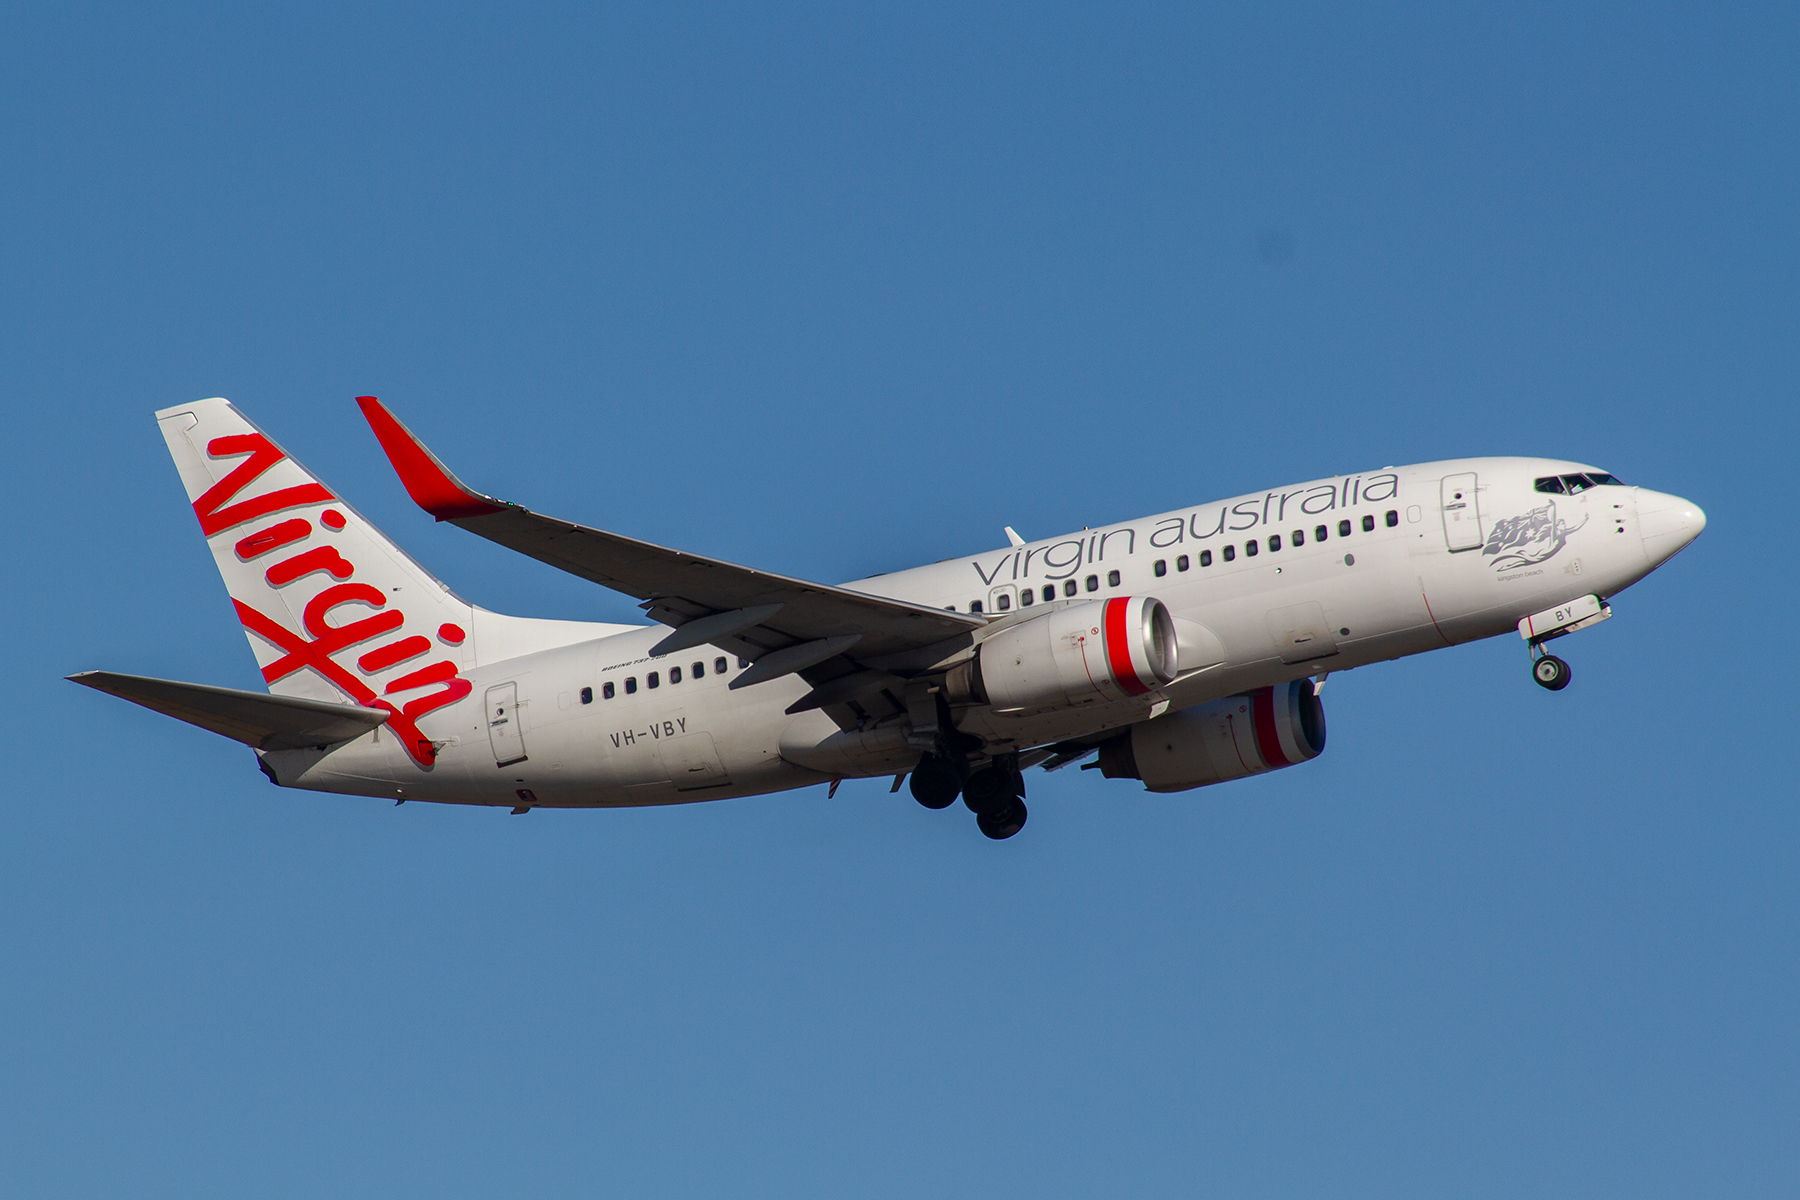 Virgin Australia Airlines Boeing 737-700 VH-VBY at Kingsford Smith